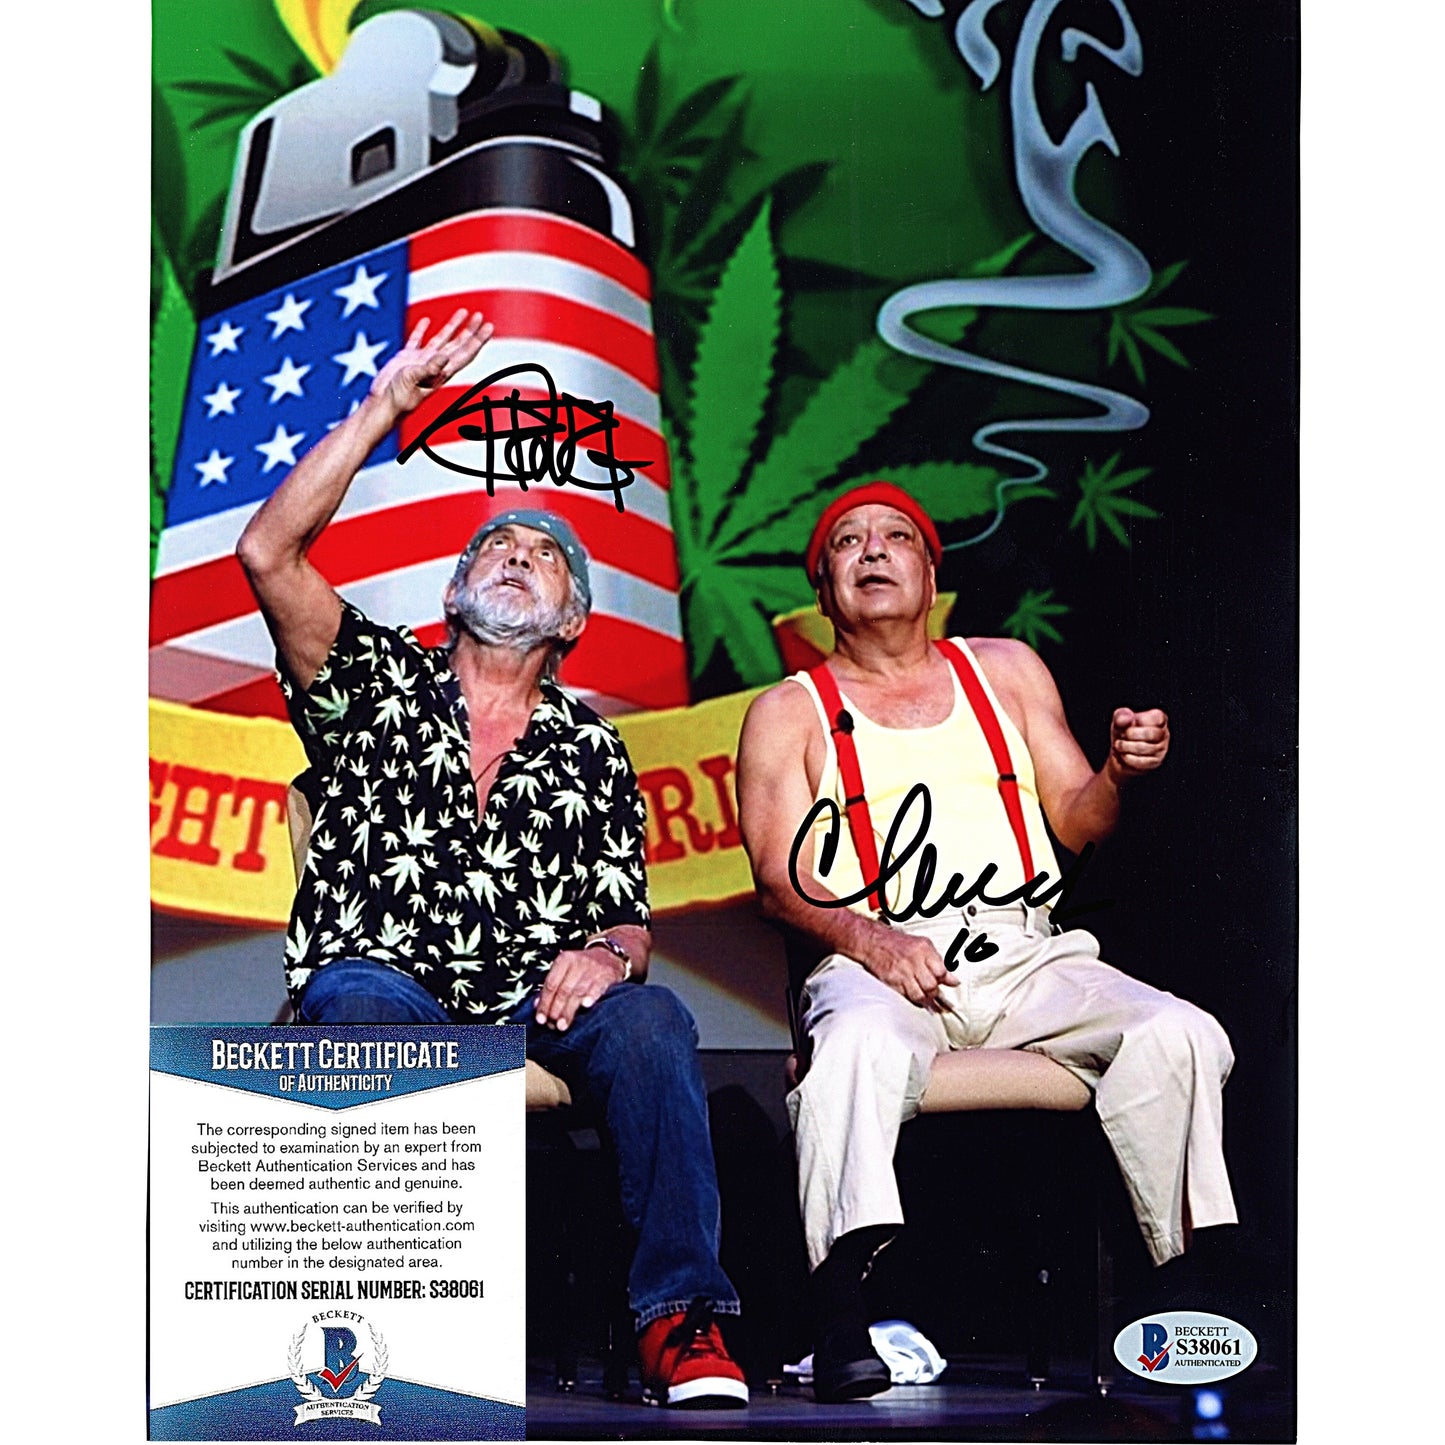 Hollywood- Autographed- Richard Cheech Marin and Tommy Chong Signed Cheech and Chong 8x10 Photograph Beckett Authentication Services BAS S38061 - 101